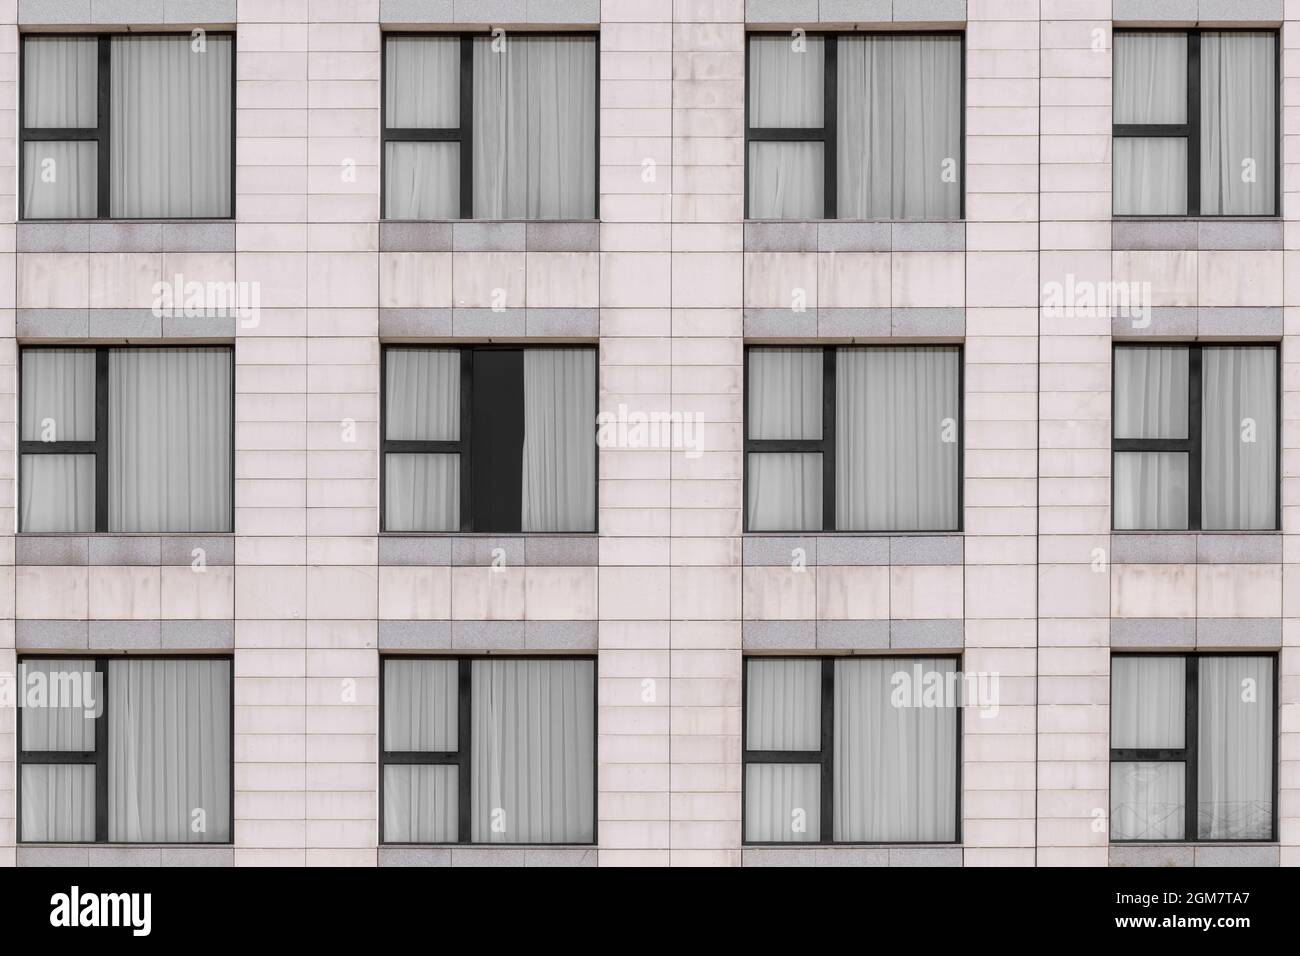 White marble granite facade and multiple windows closed with black metal frames Stock Photo